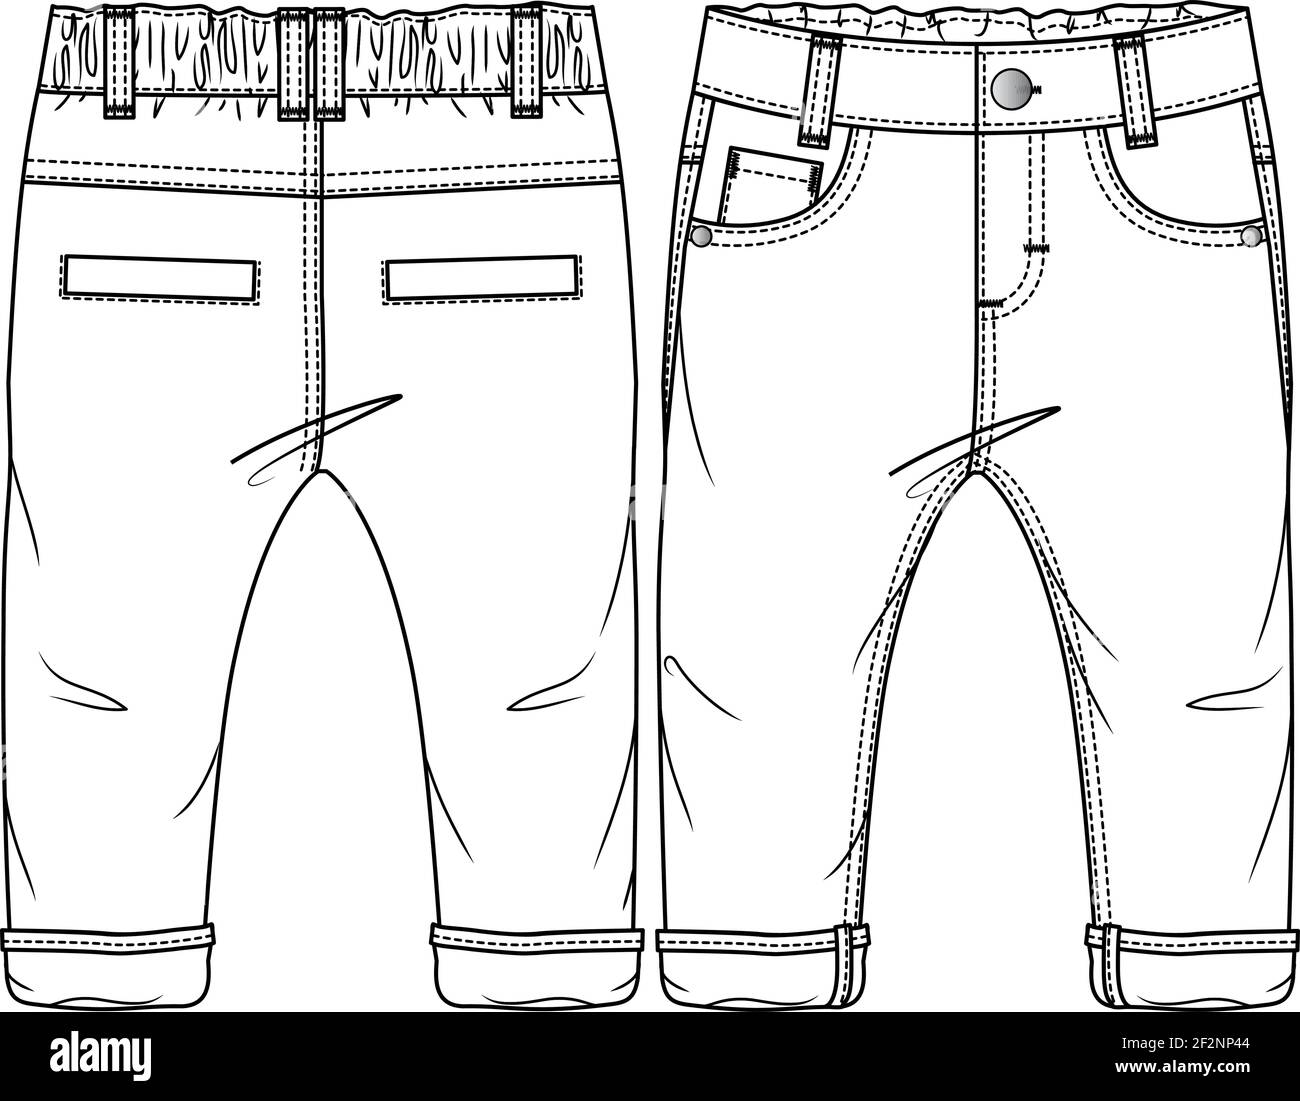 Baby Boys Woven Pant fashion flat sketch template. Technical Fashion Illustration. Rolled up Hem. Back Welt Pockets Stock Vector